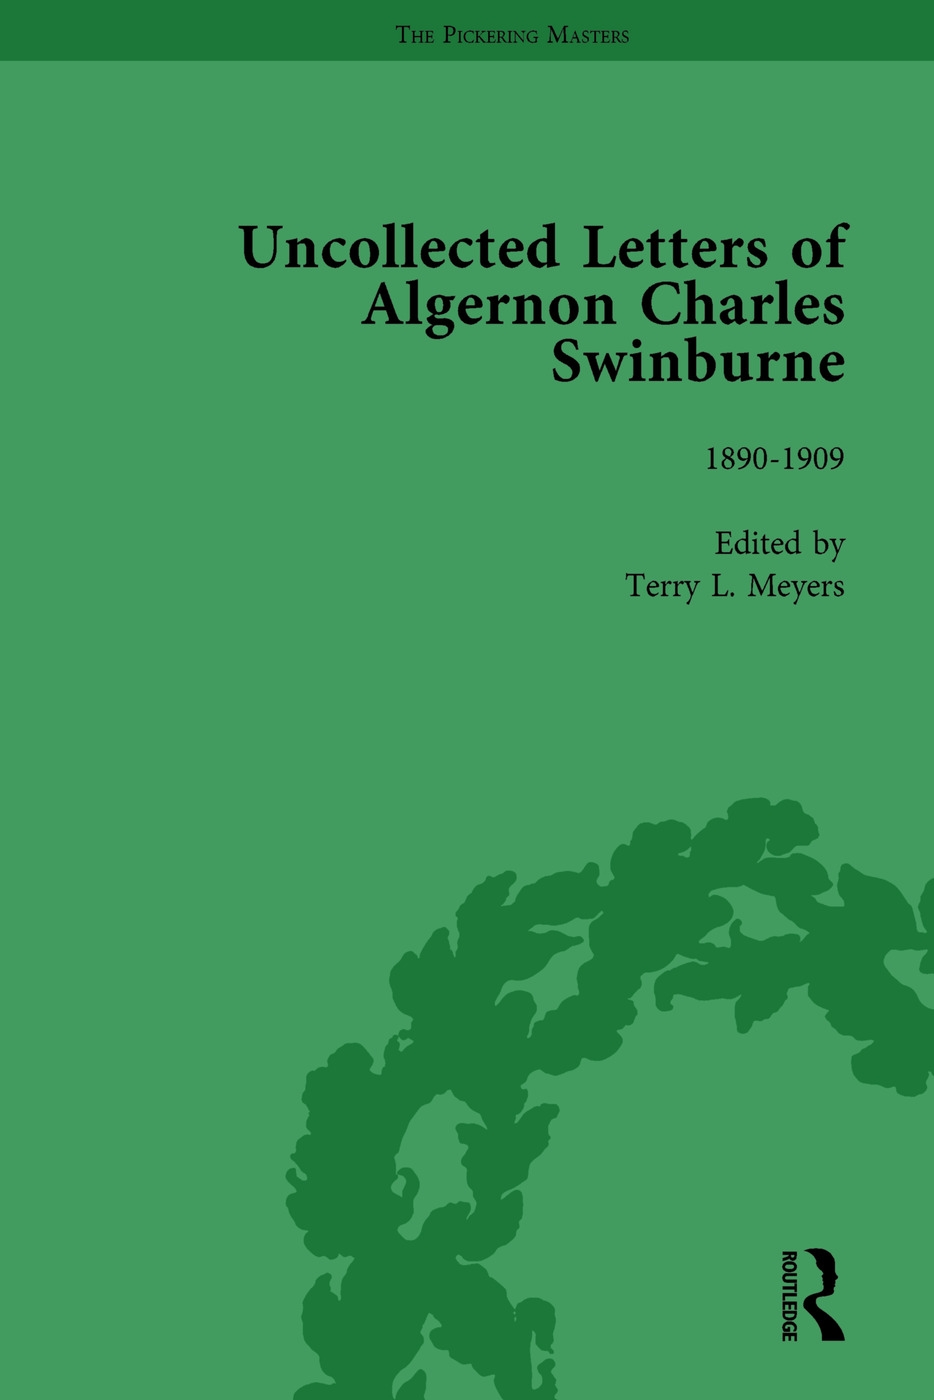 The Uncollected Letters of Algernon Charles Swinburne Vol 3